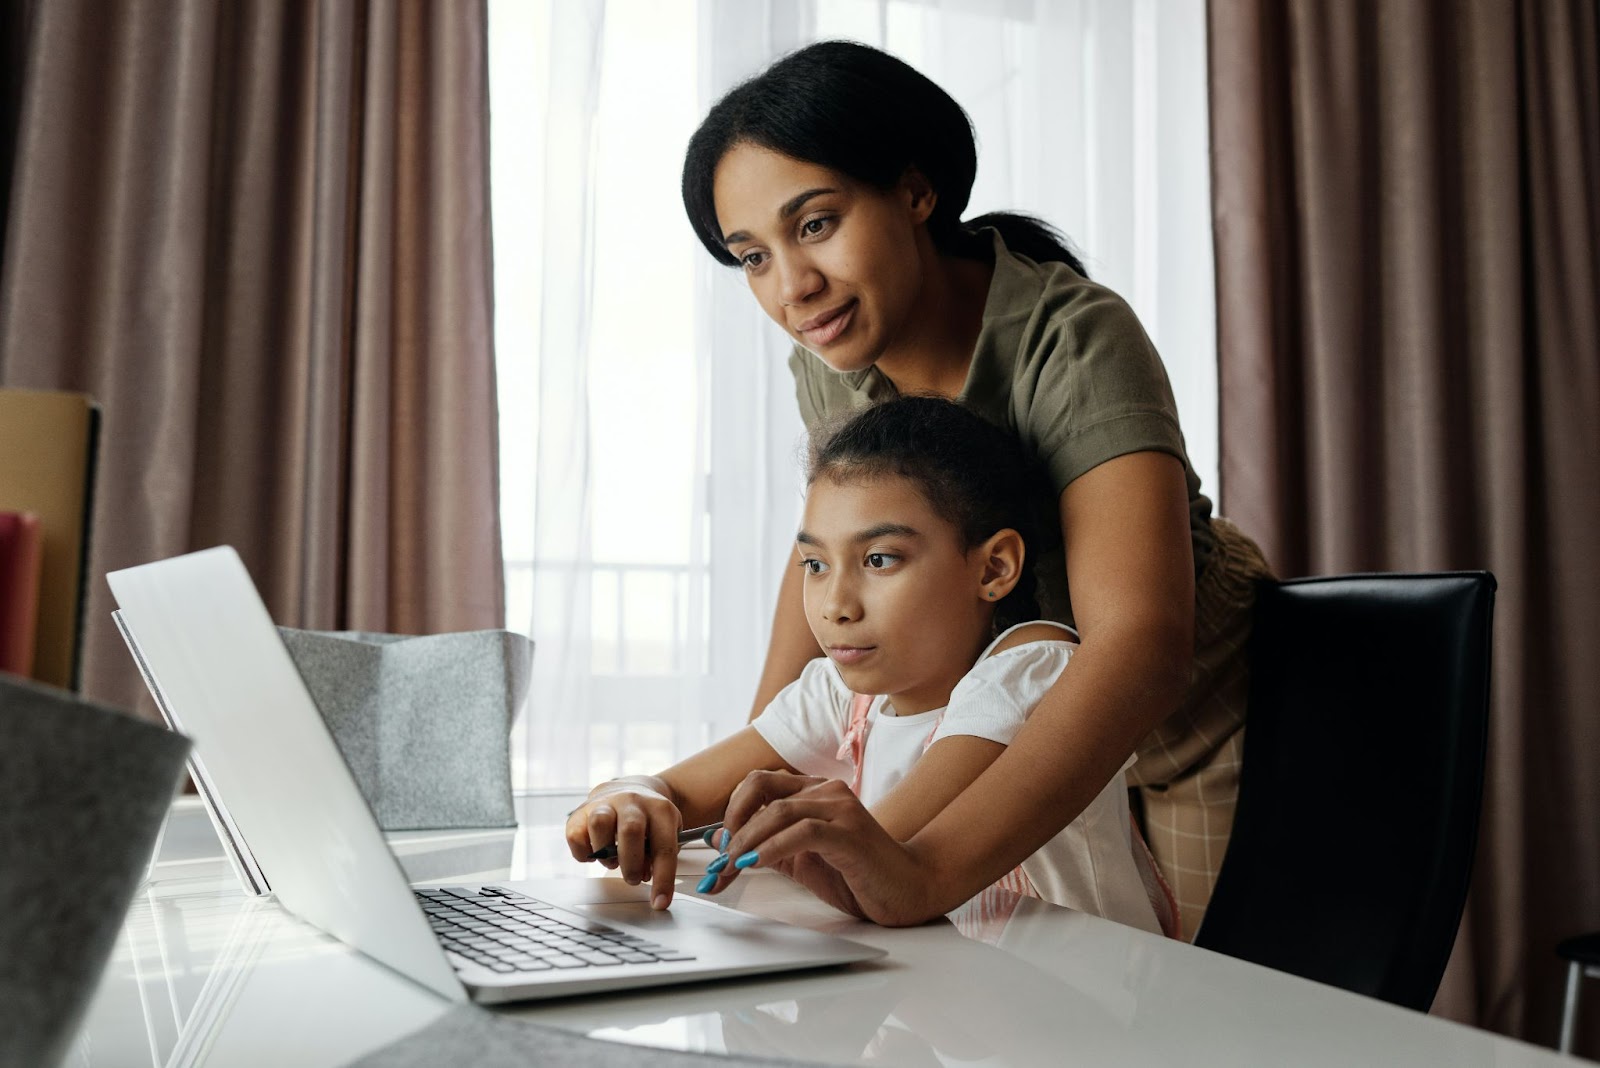 Online security tips for parents